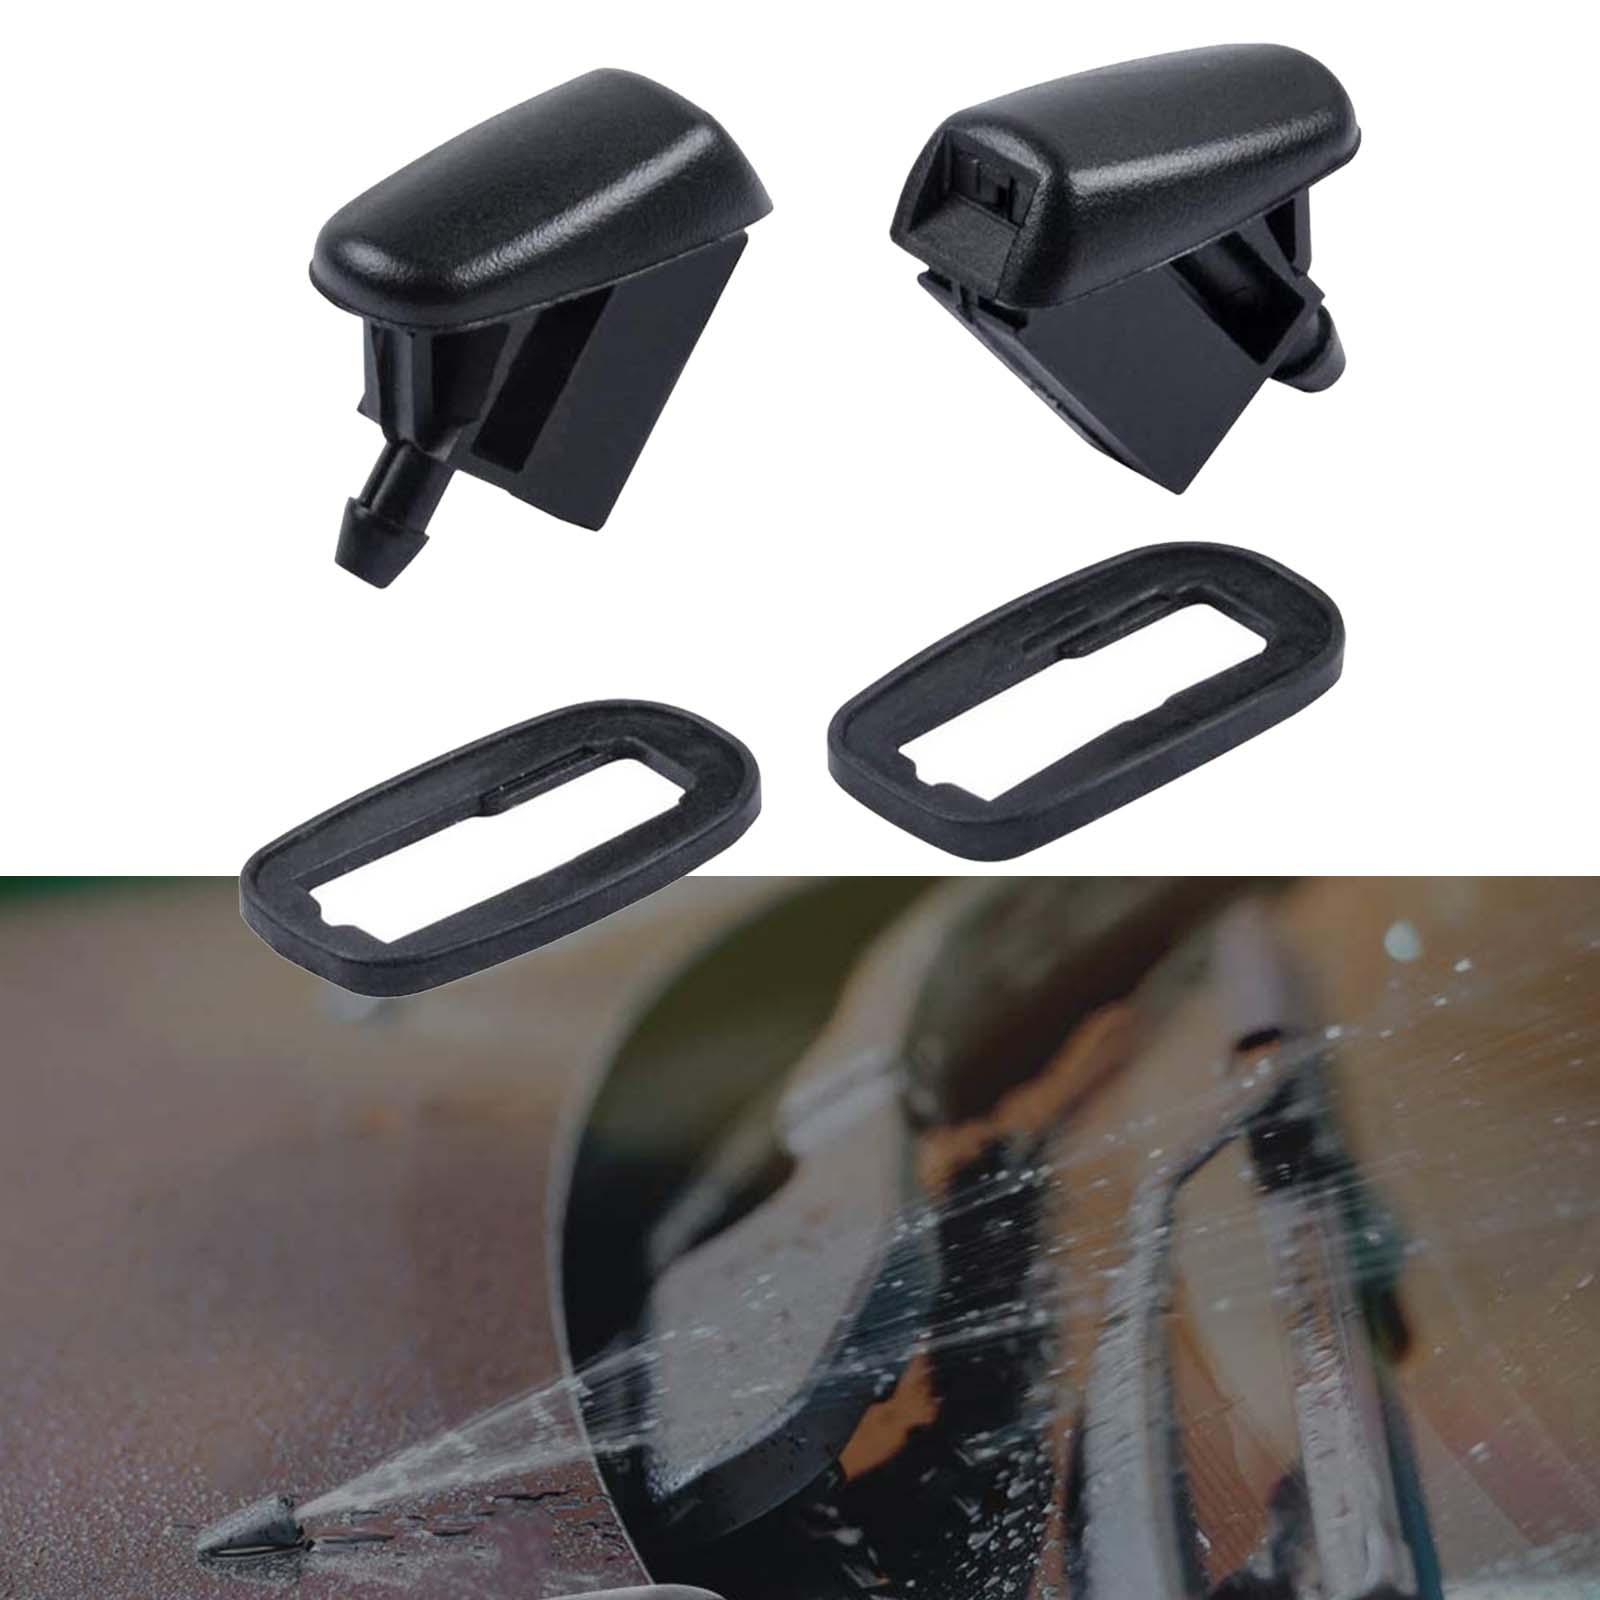 2Pcs Front Windshield Washer Nozzles for Ford Focus MK2 MK3 Fiesta